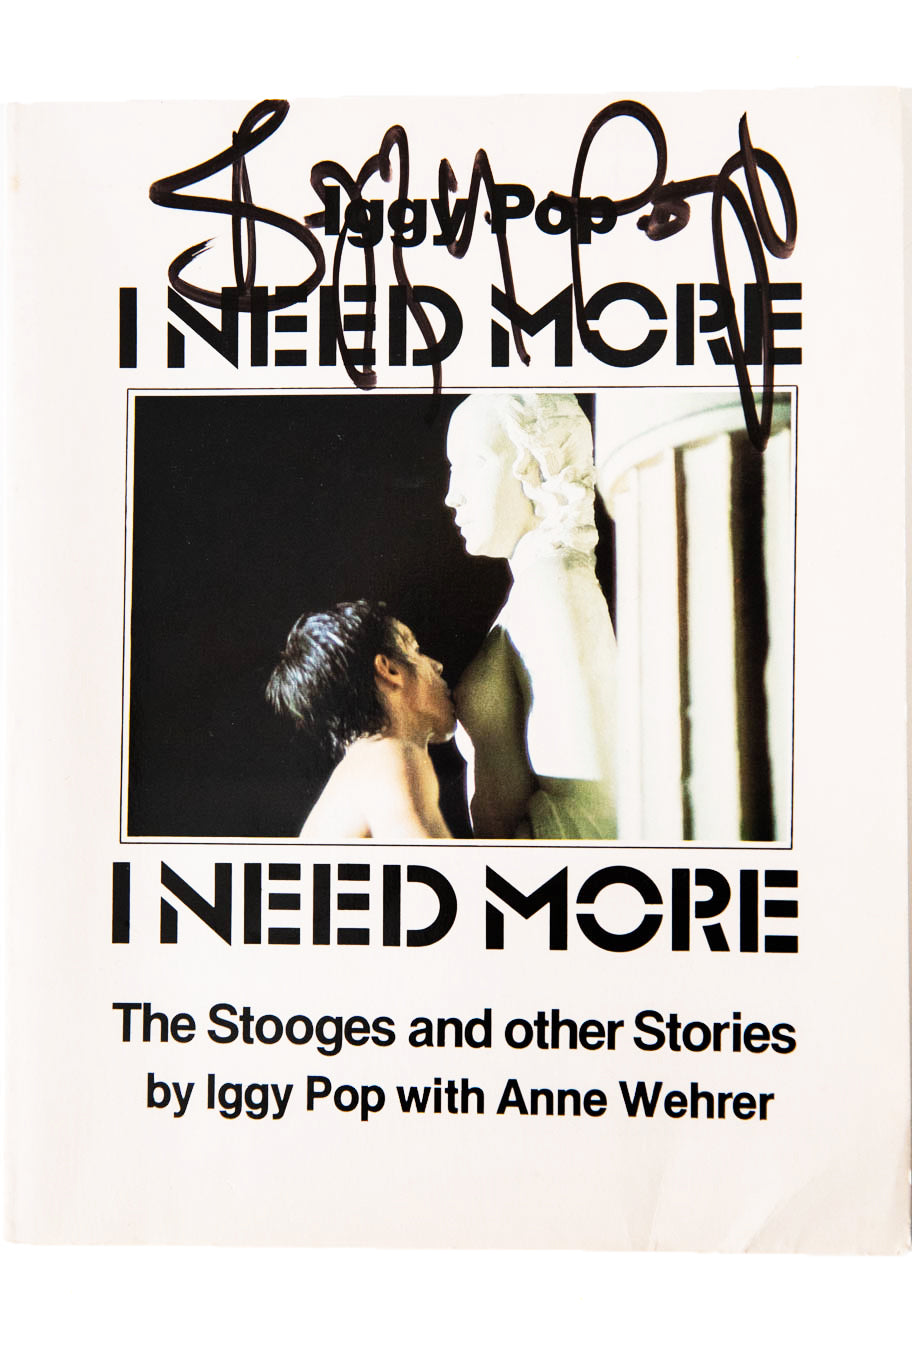 I NEED MORE | The Stooges and Other Stories